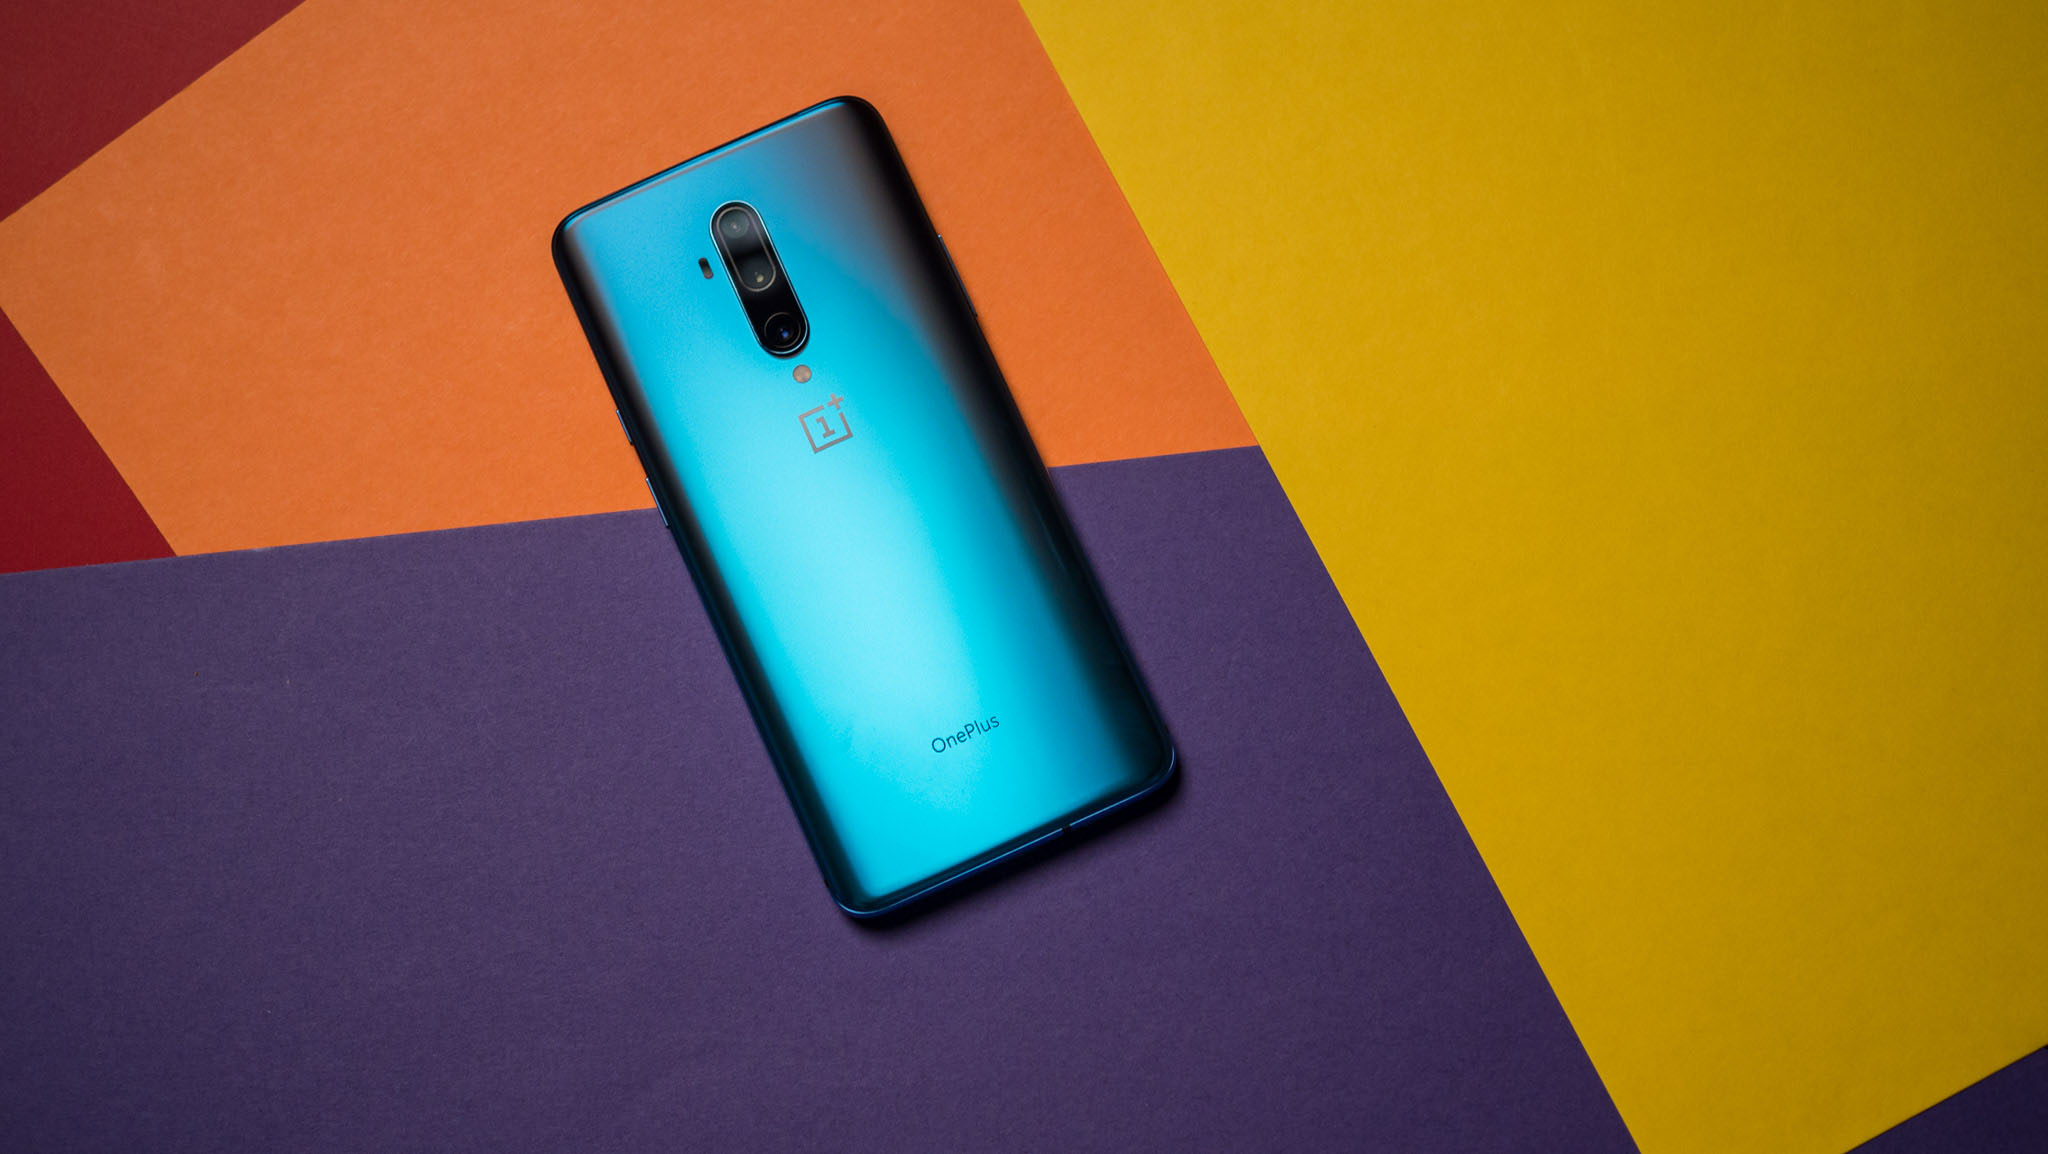 OnePlus 7 Pro on a colorful background